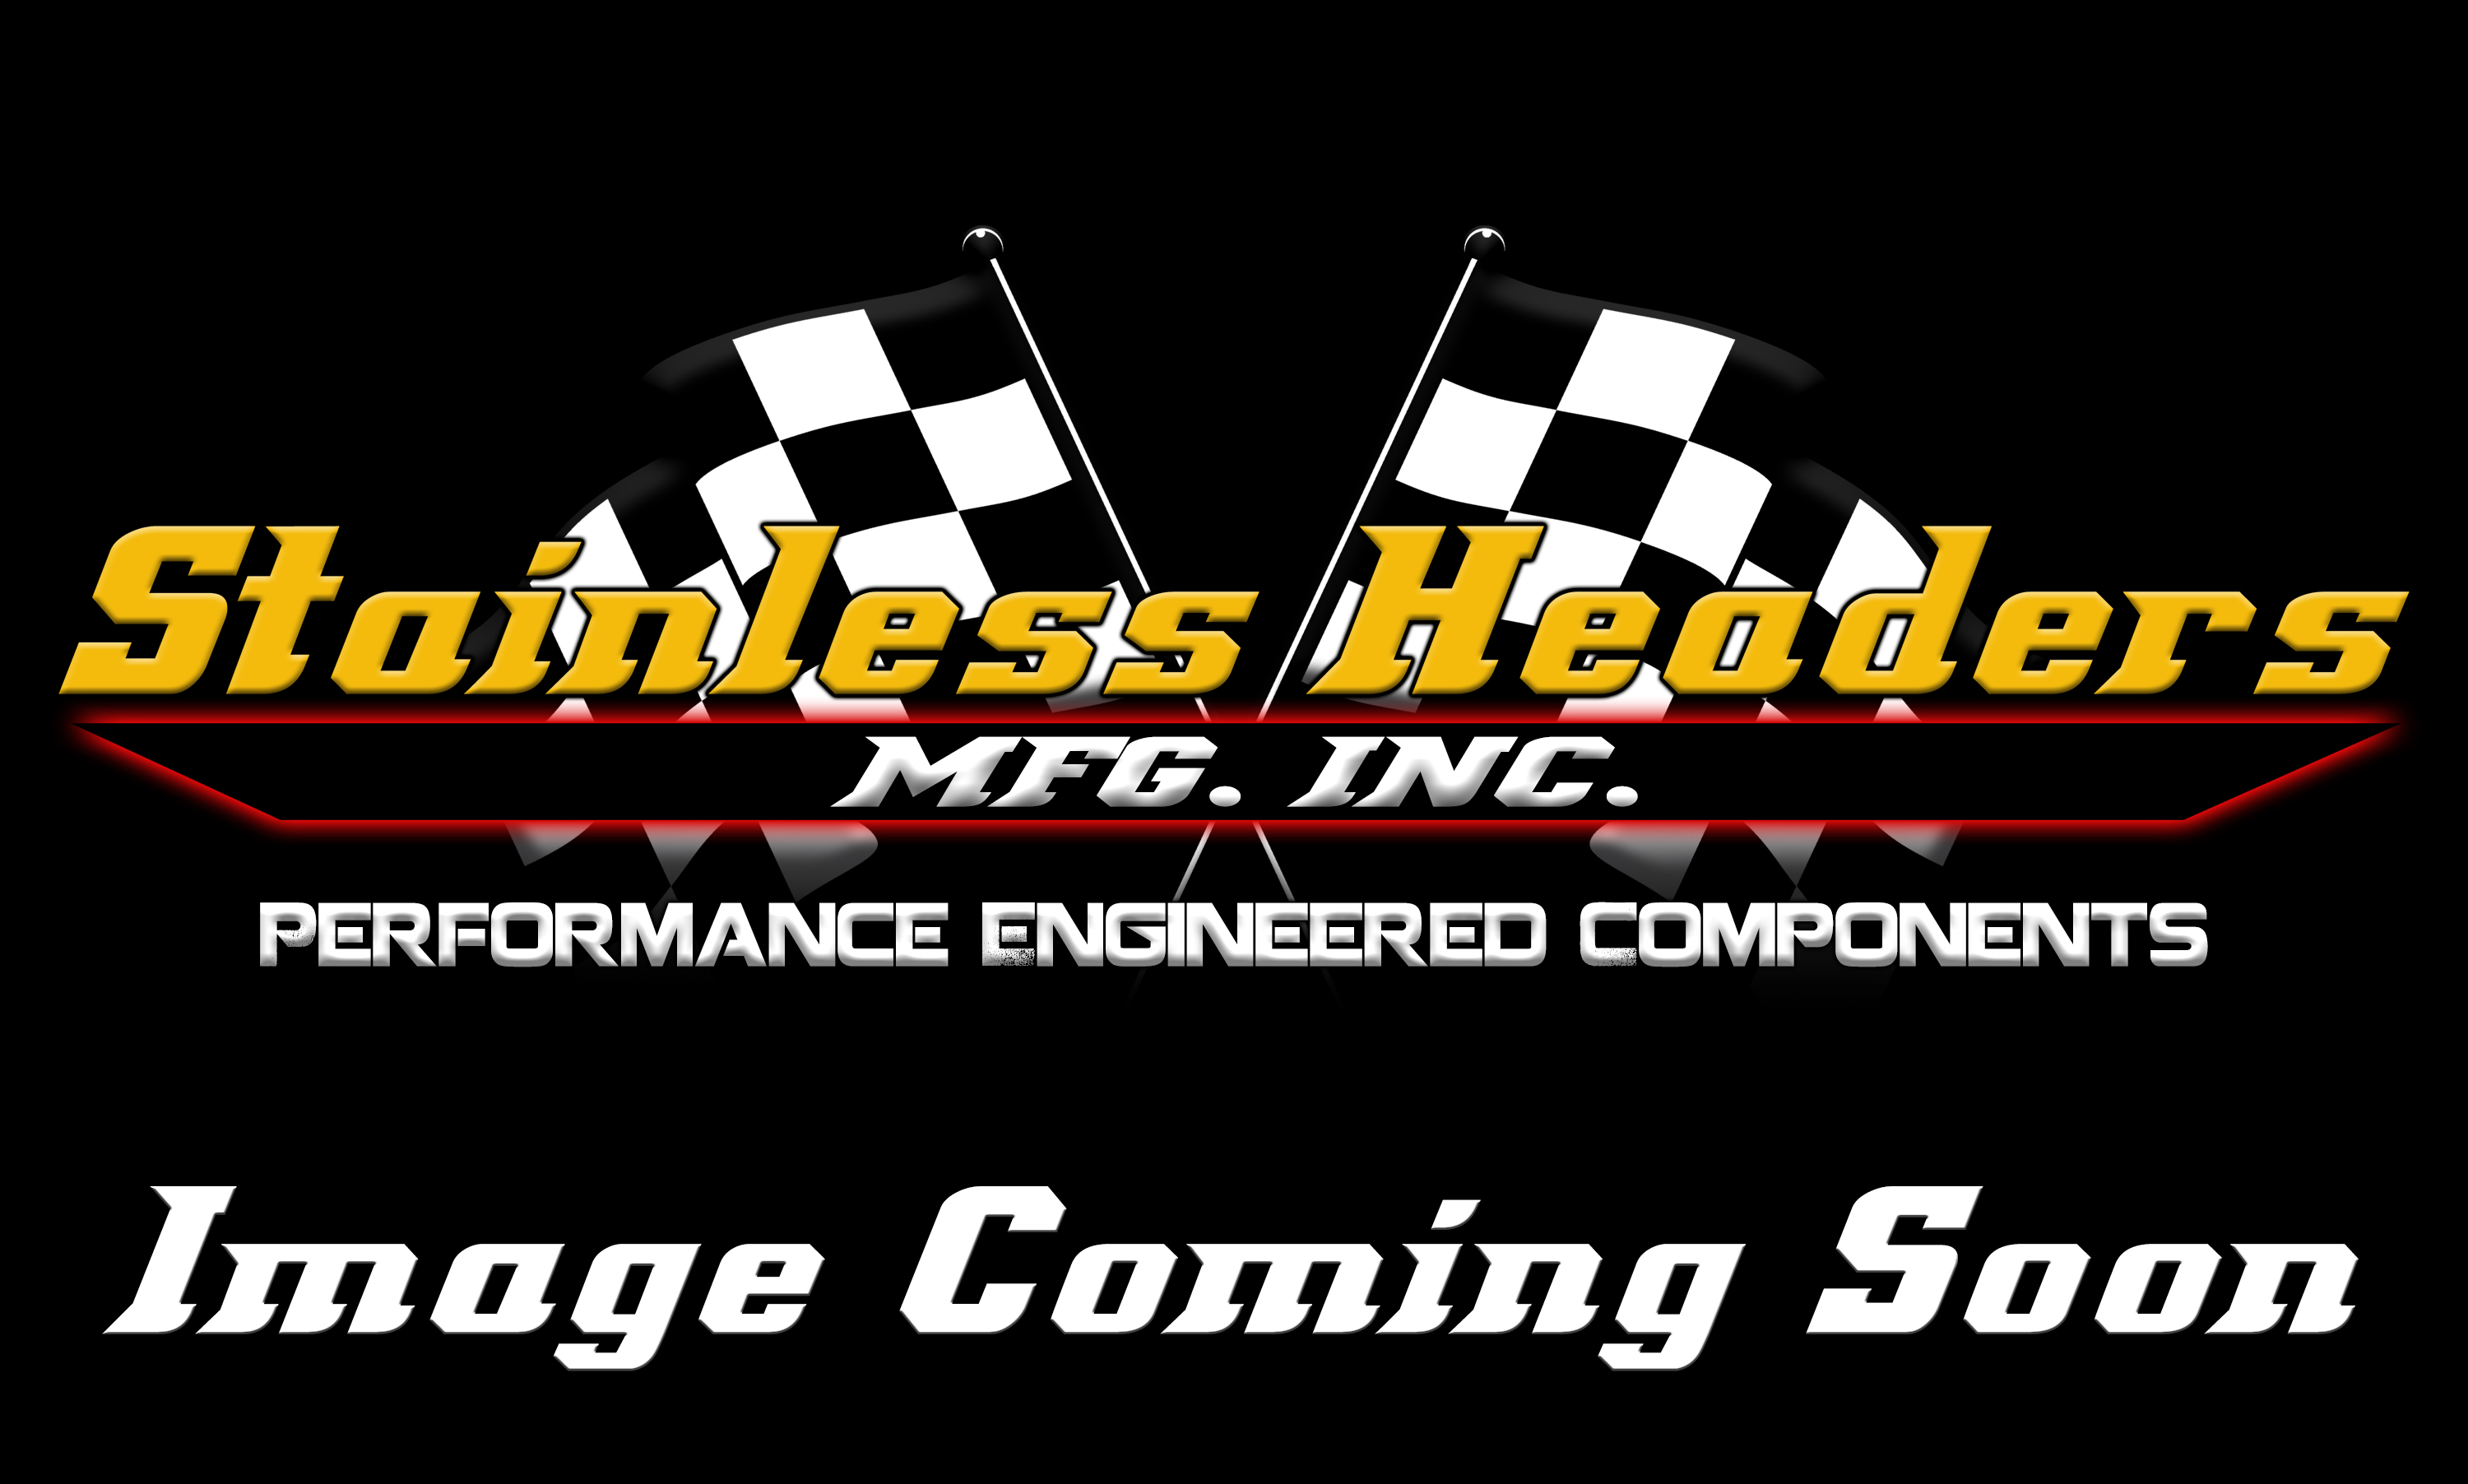 Stainless Headers - 2 3/8" Primary 6 into 1 Performance Merge Collector-18ga 304ss